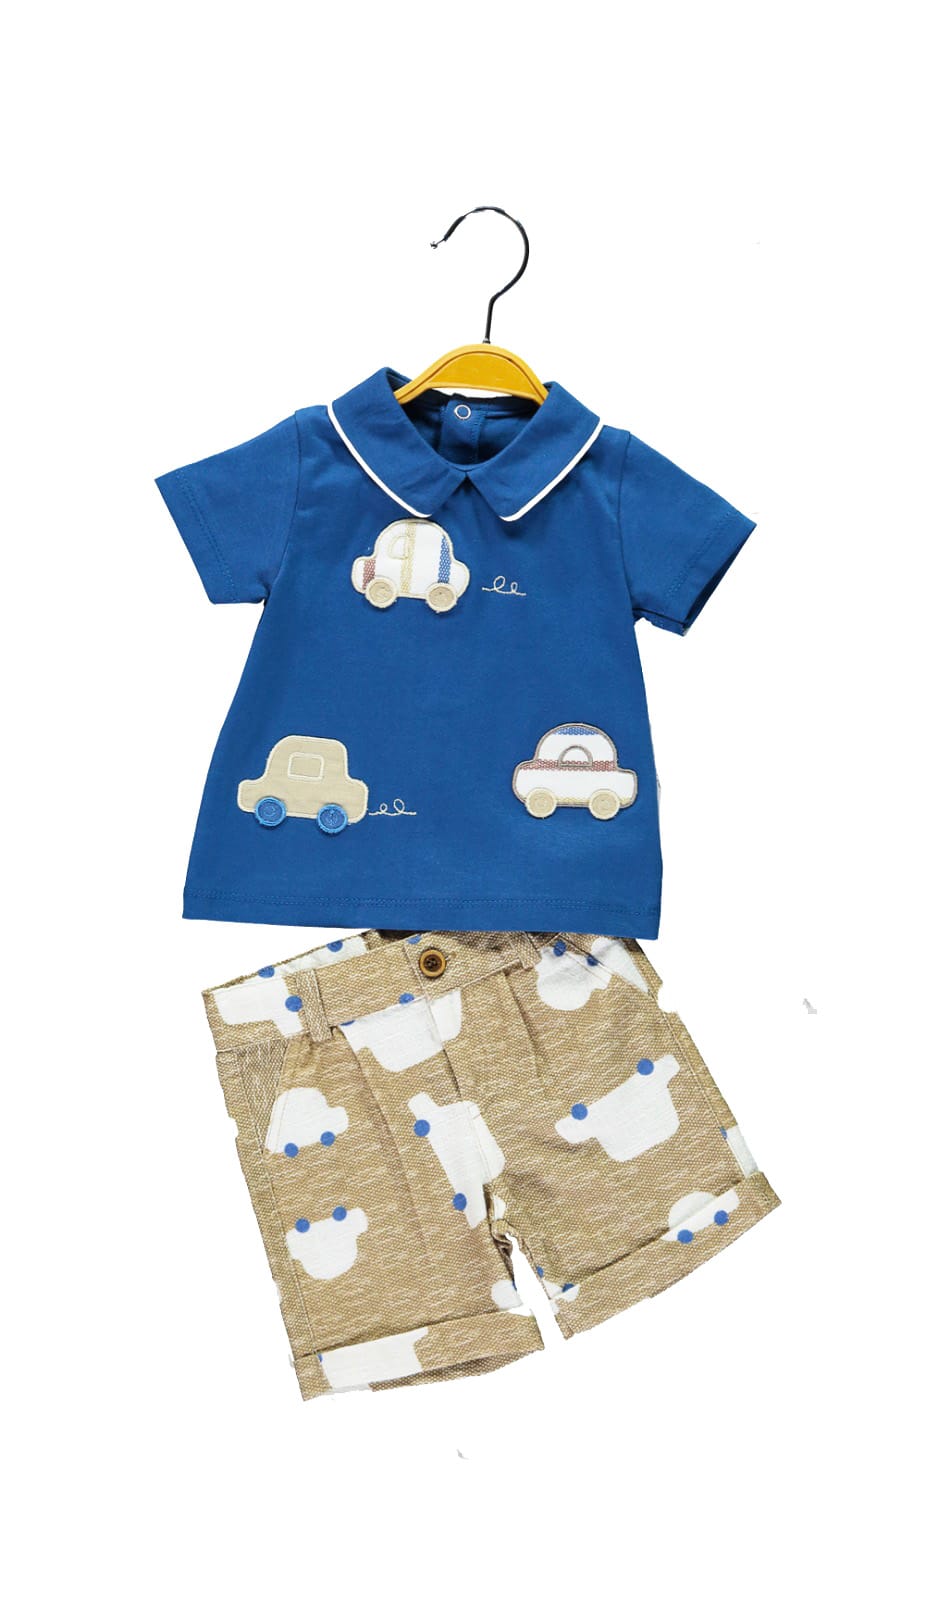 blue half sleeve shirt with embroidery and bayge aop shorts